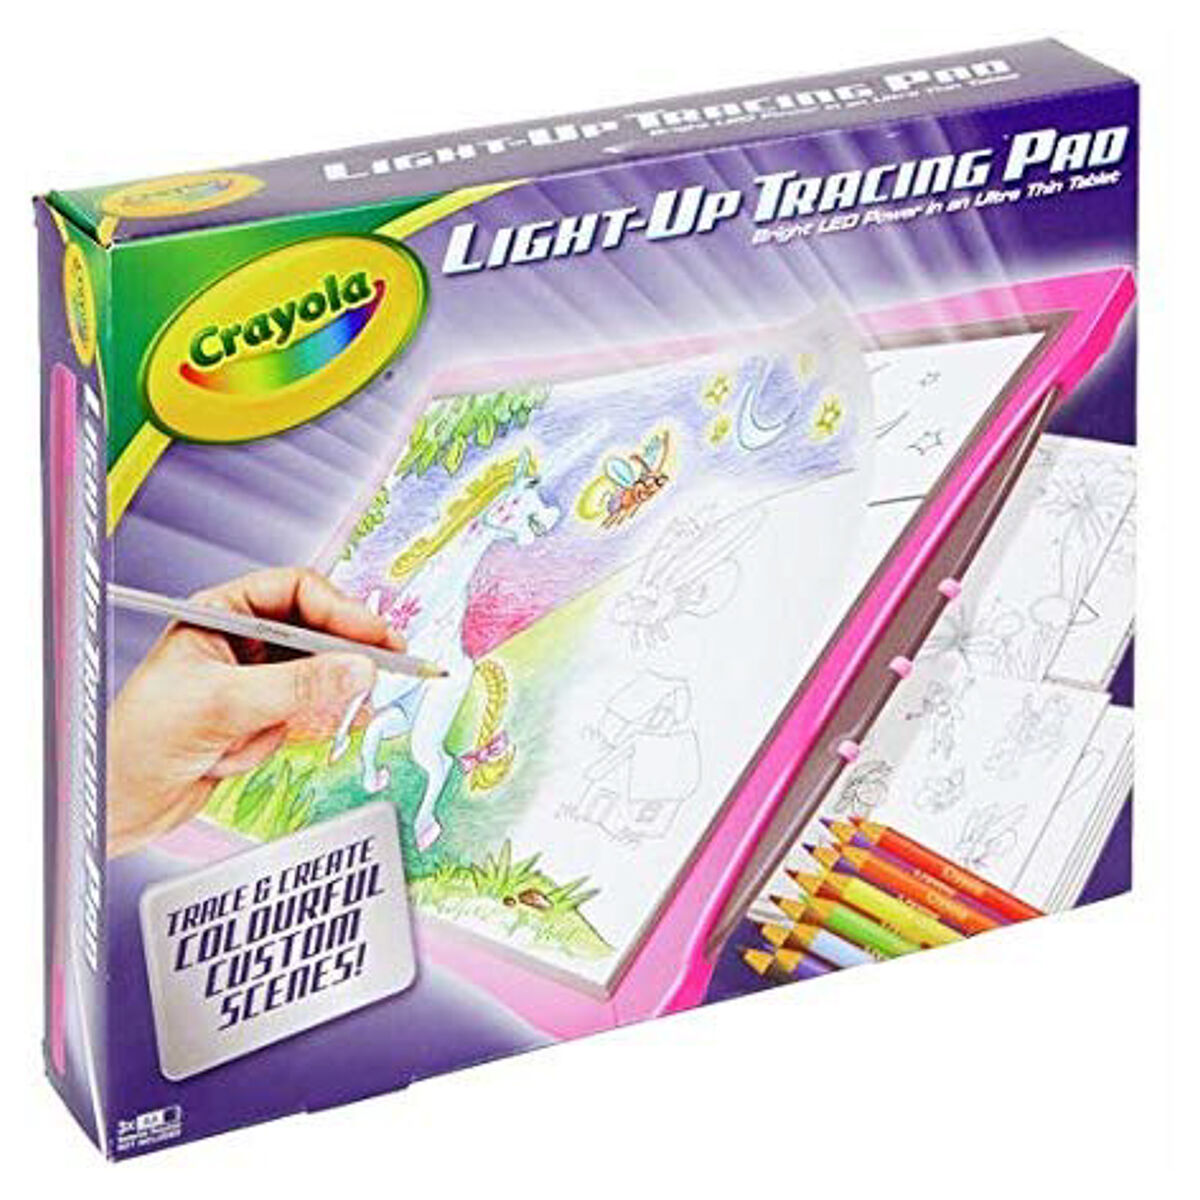 LED Light Up Tracing Pad Drawing & Colouring Trace and Create with